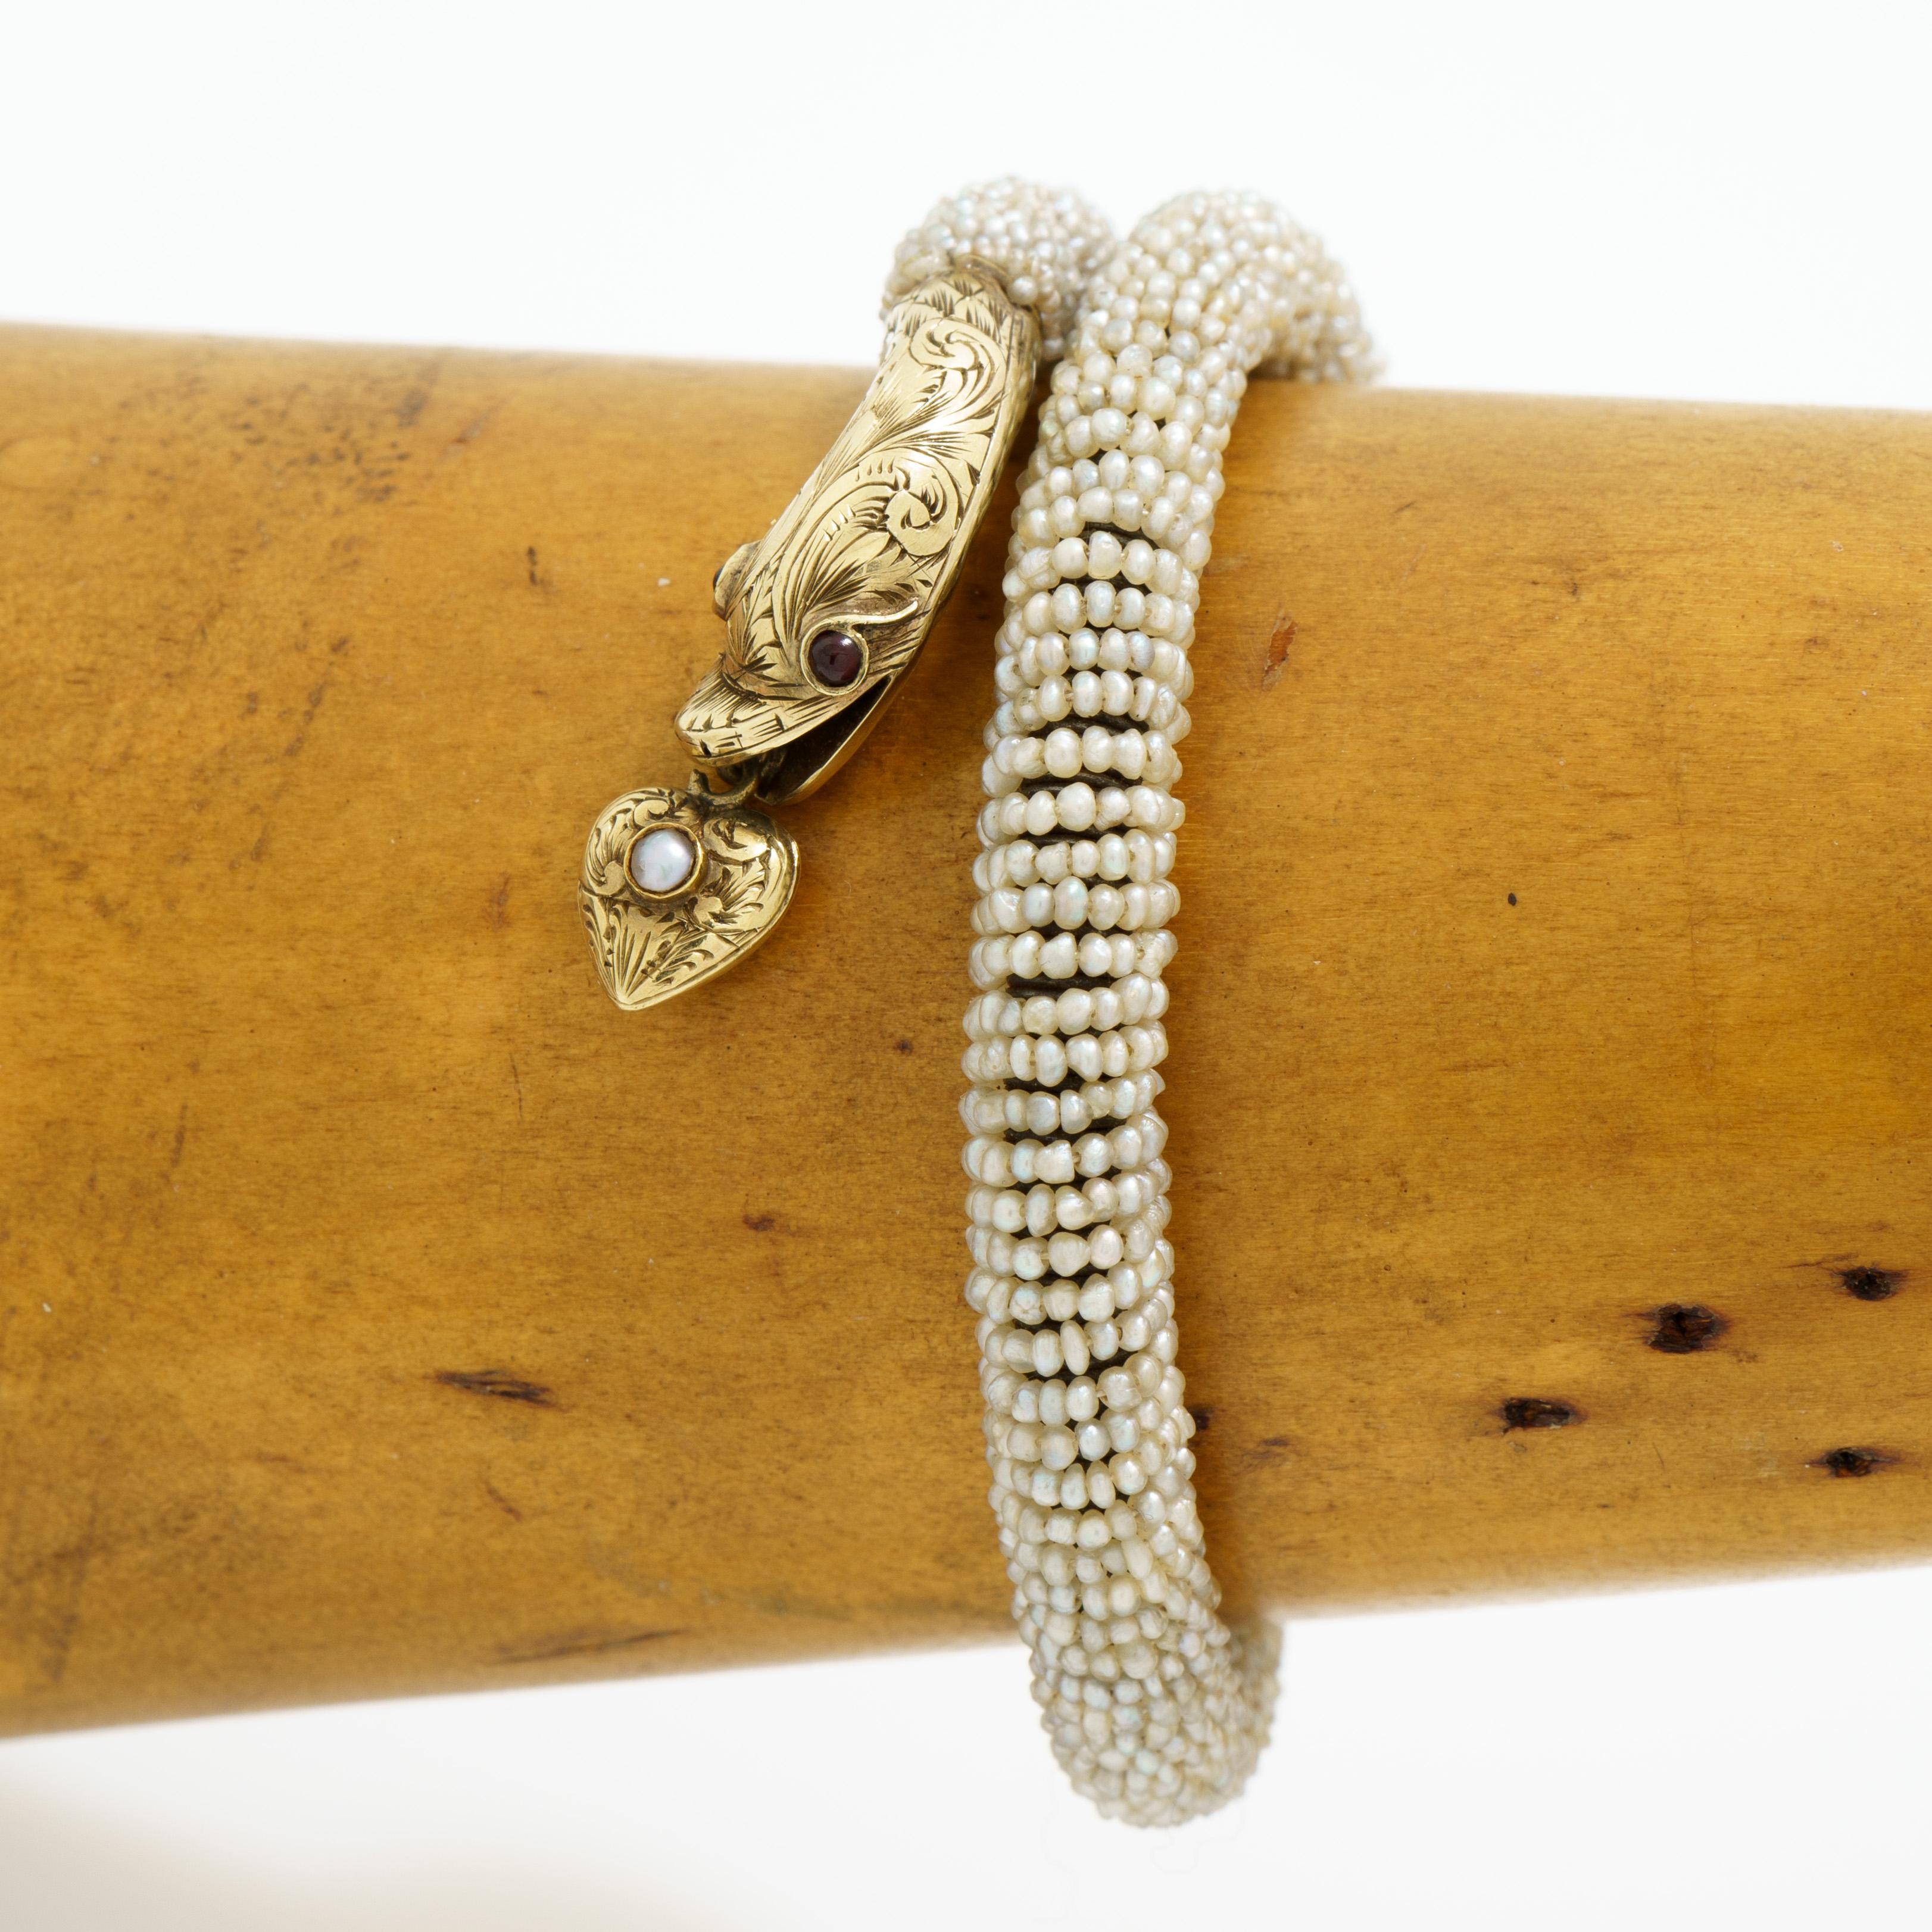 Antique 14 Karat Yellow Gold and Seed Pearl Snake Wrap Bracelet with Heart Locket 
c.1880

Snake head:
Width with Heart  8.1mm
Head Length: 27.13
Tail Tip Length: 14.2mm
Overall length: 230mm

18.55 grams
fits up to a size 6.5 wrist